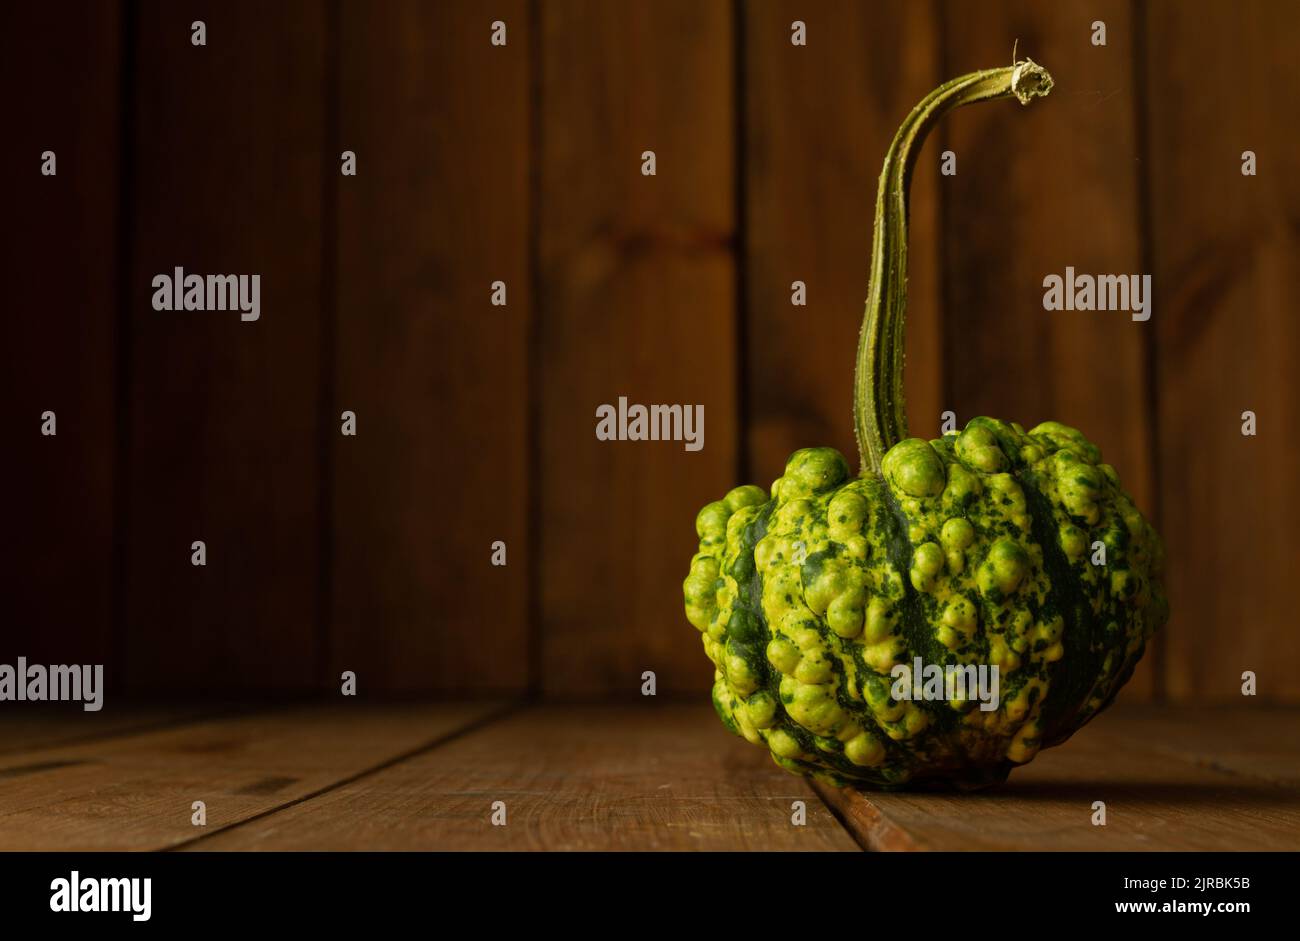 Small decorative green autumn pumpkin or squash on a wooden background with copy space. Stock Photo